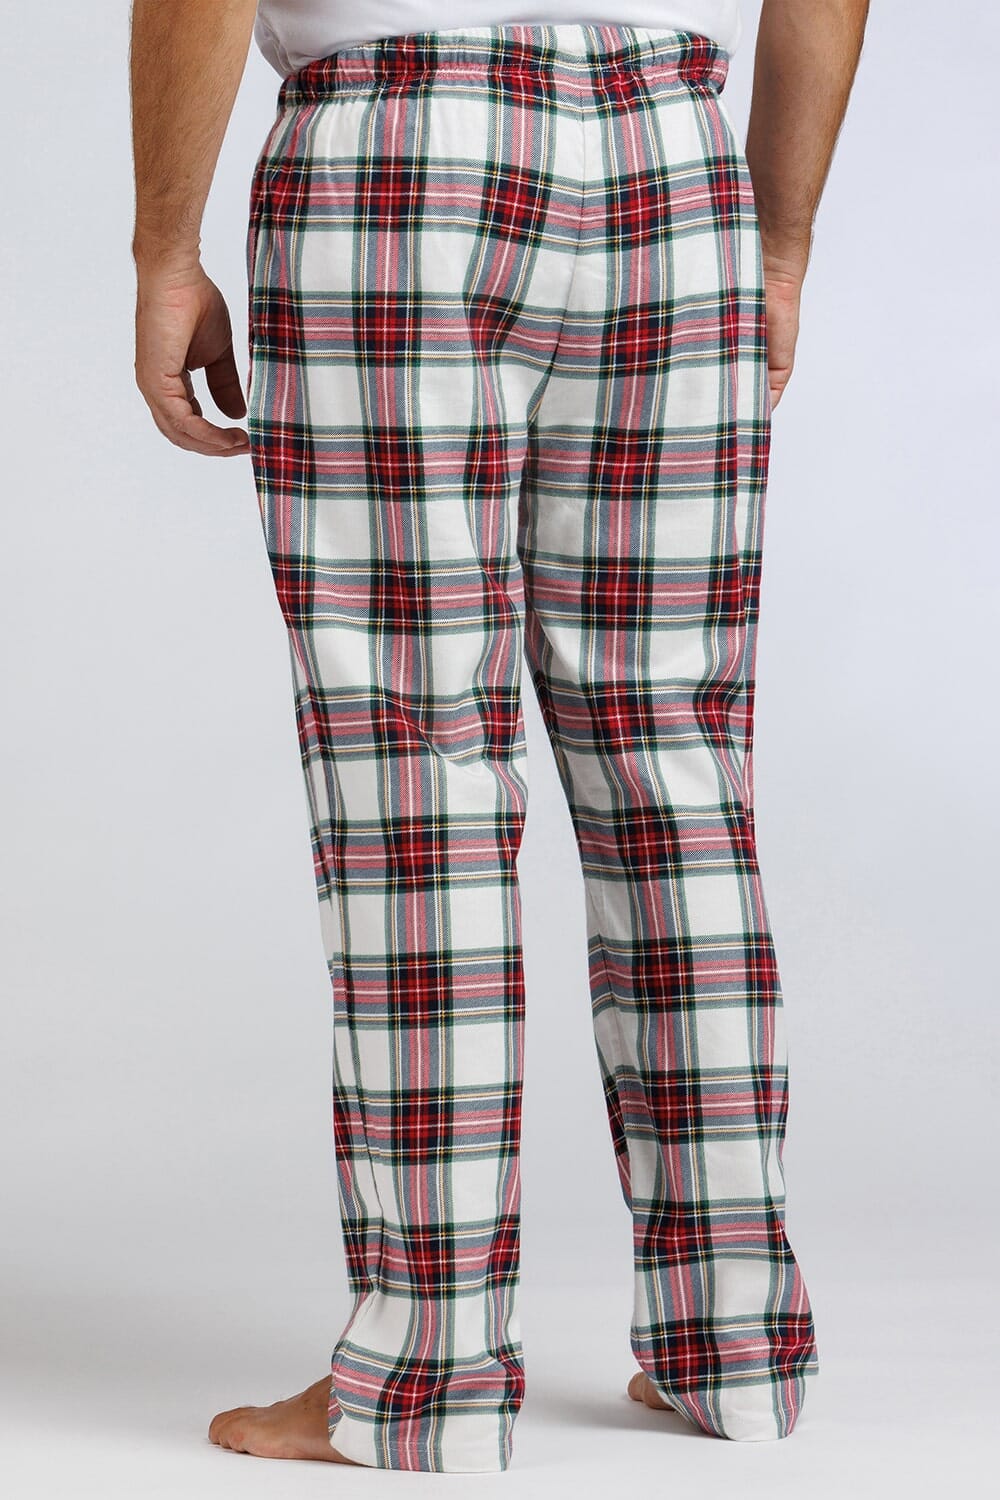 Red Black Plaid Pajama Pants Men Lounging Relaxed House PJs Sleep Bottoms Mens  Flannel Cotton Drawstring Button Fly Sleepwear 210522 From 11,23 € | DHgate